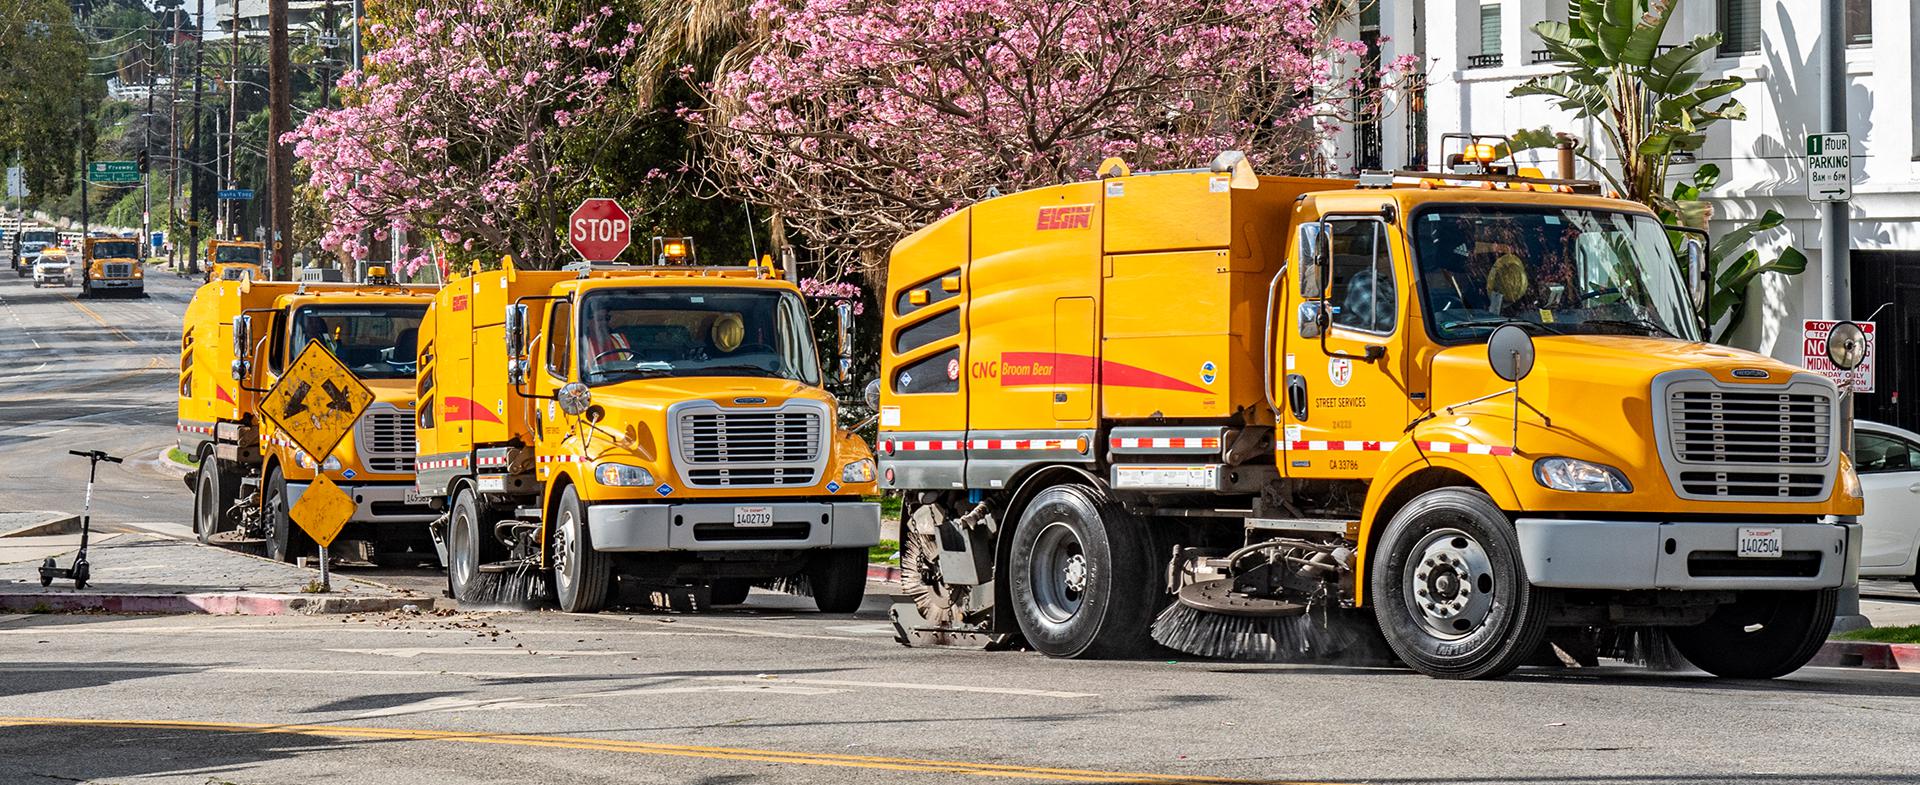 Los Angeles Street Cleaning Schedule 2022 Street Sweeping Near Me | Bureau Of Street Services